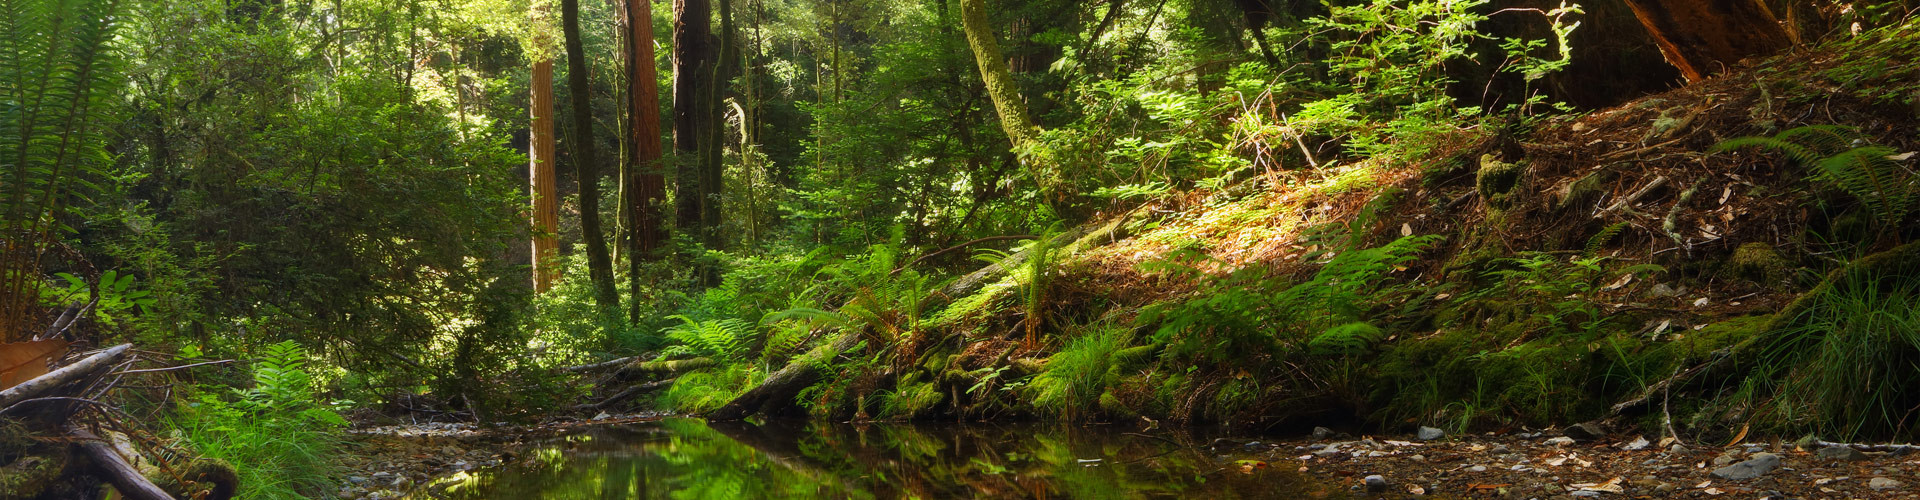 Lush redwood forest with stream